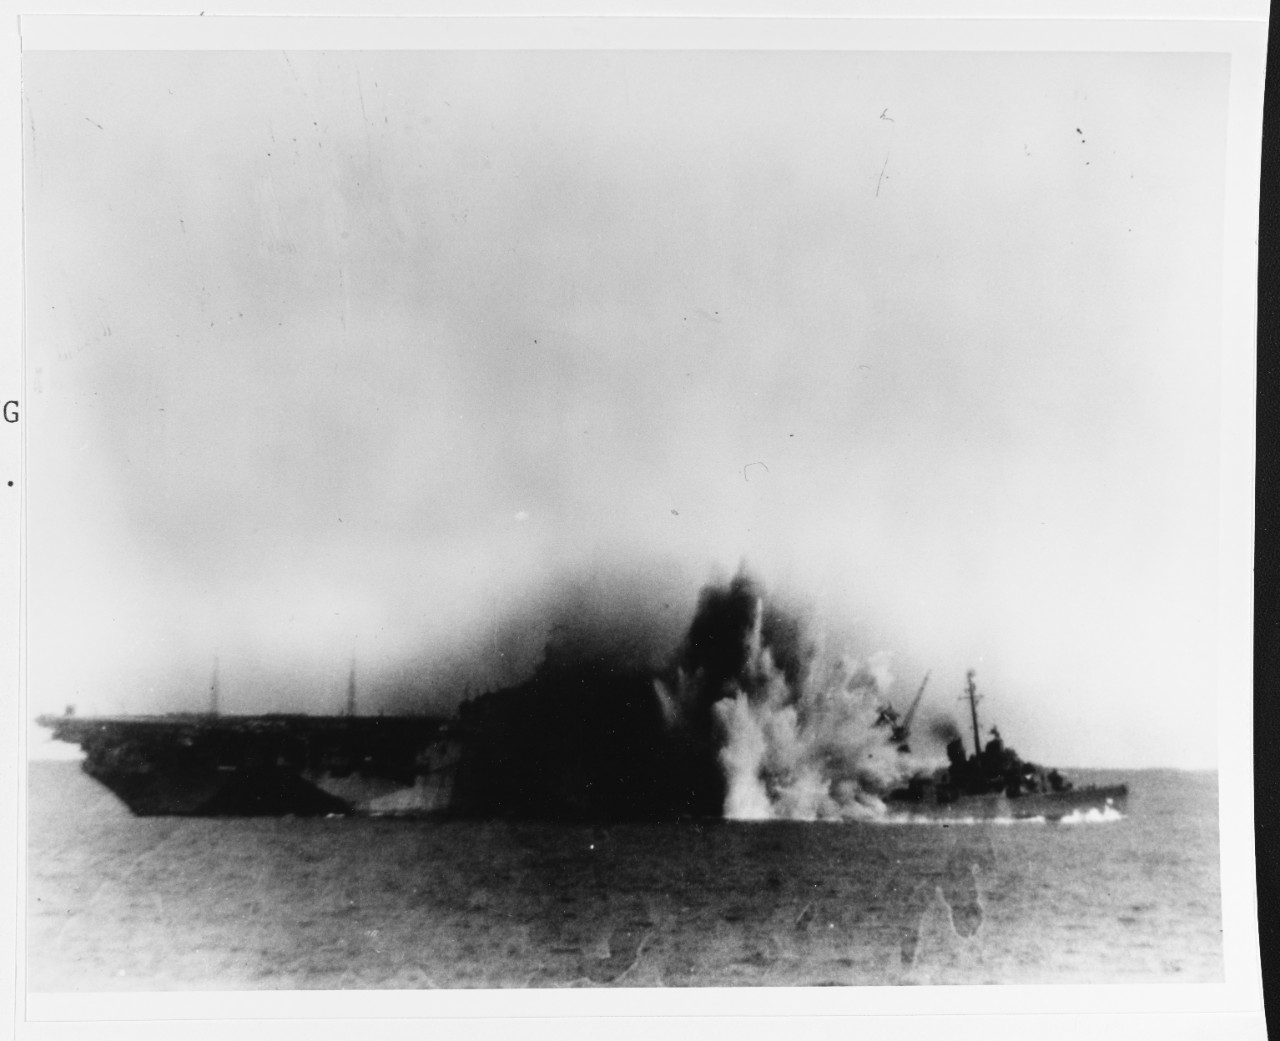 Carrier strikes on Japan, March 1945.